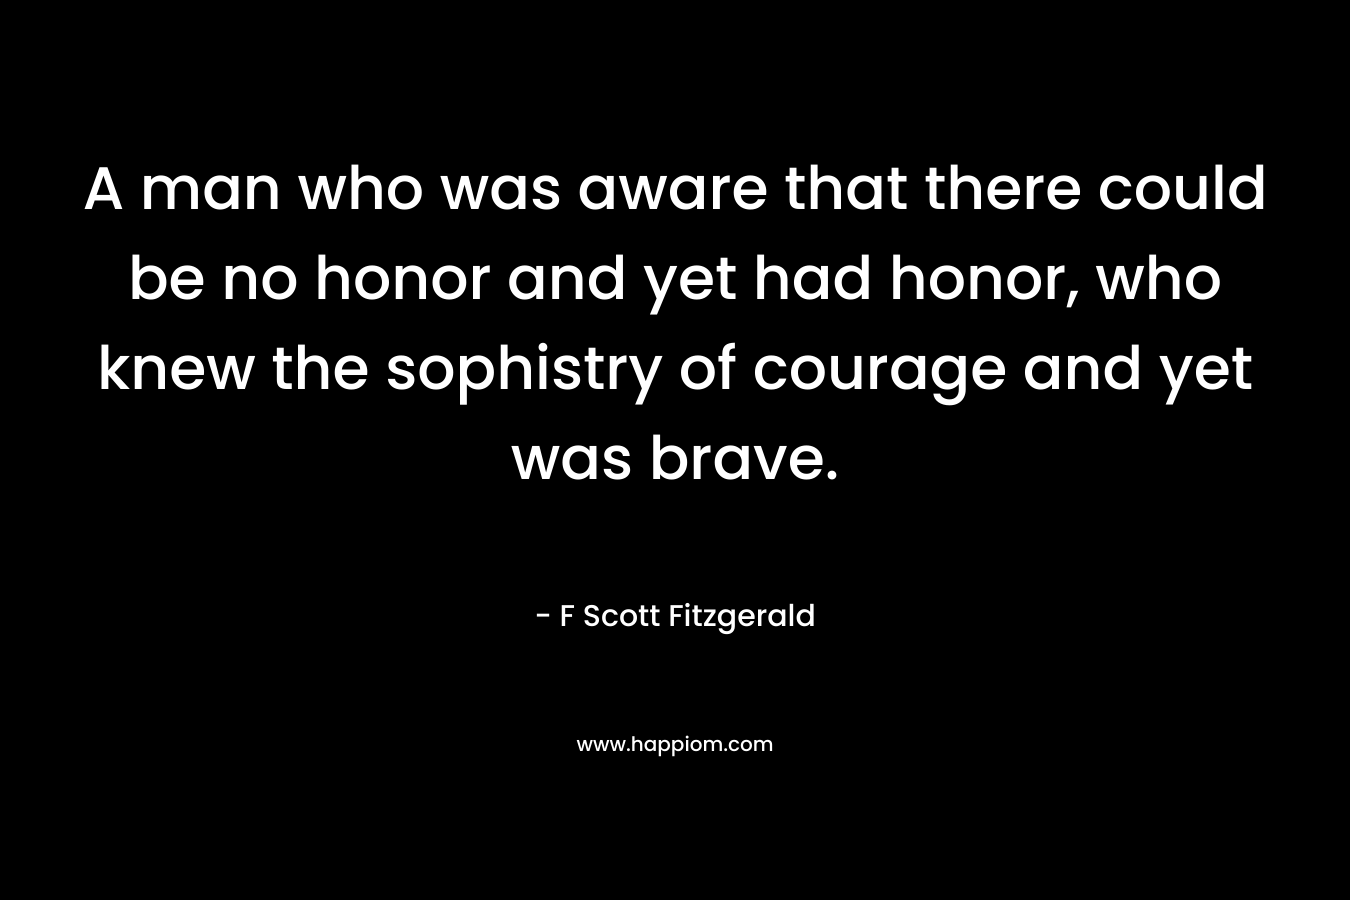 A man who was aware that there could be no honor and yet had honor, who knew the sophistry of courage and yet was brave. – F Scott Fitzgerald